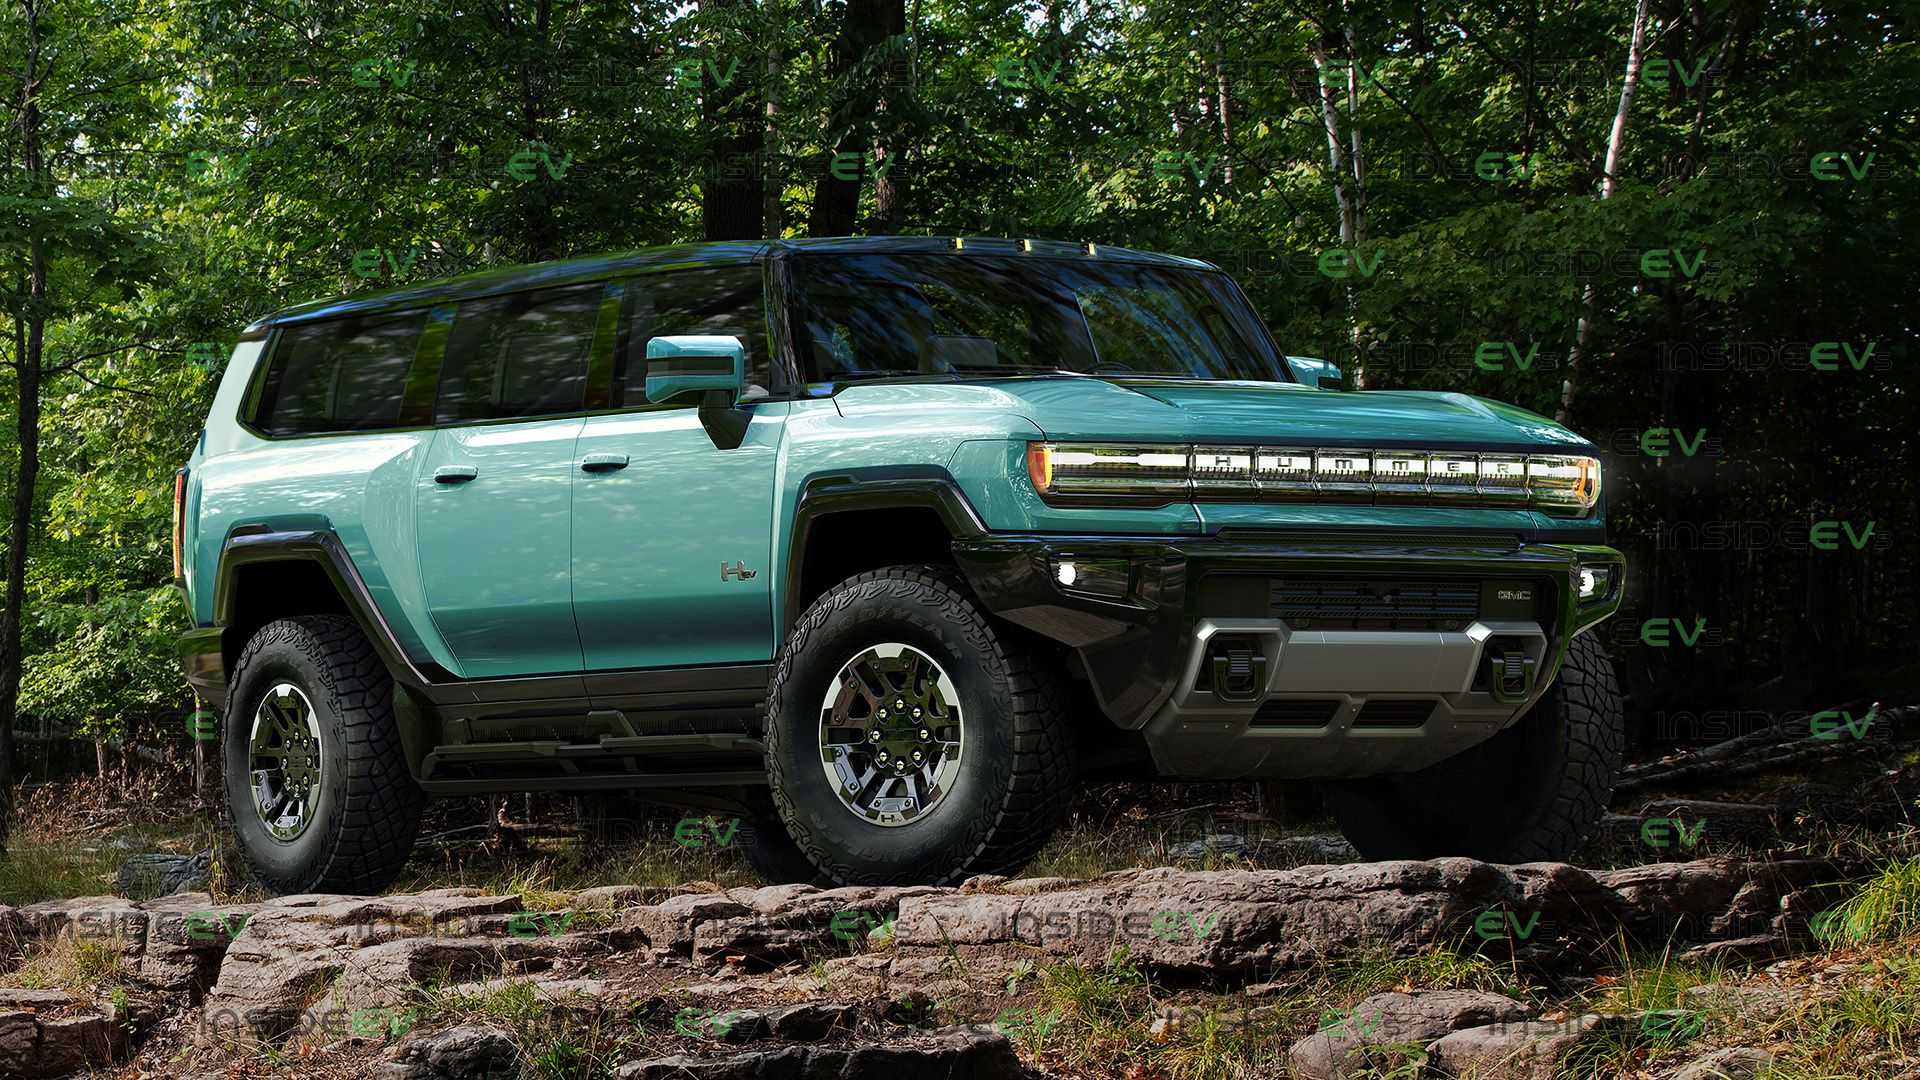 Here's The GMC Hummer EV SUV Rendered In Several Colors